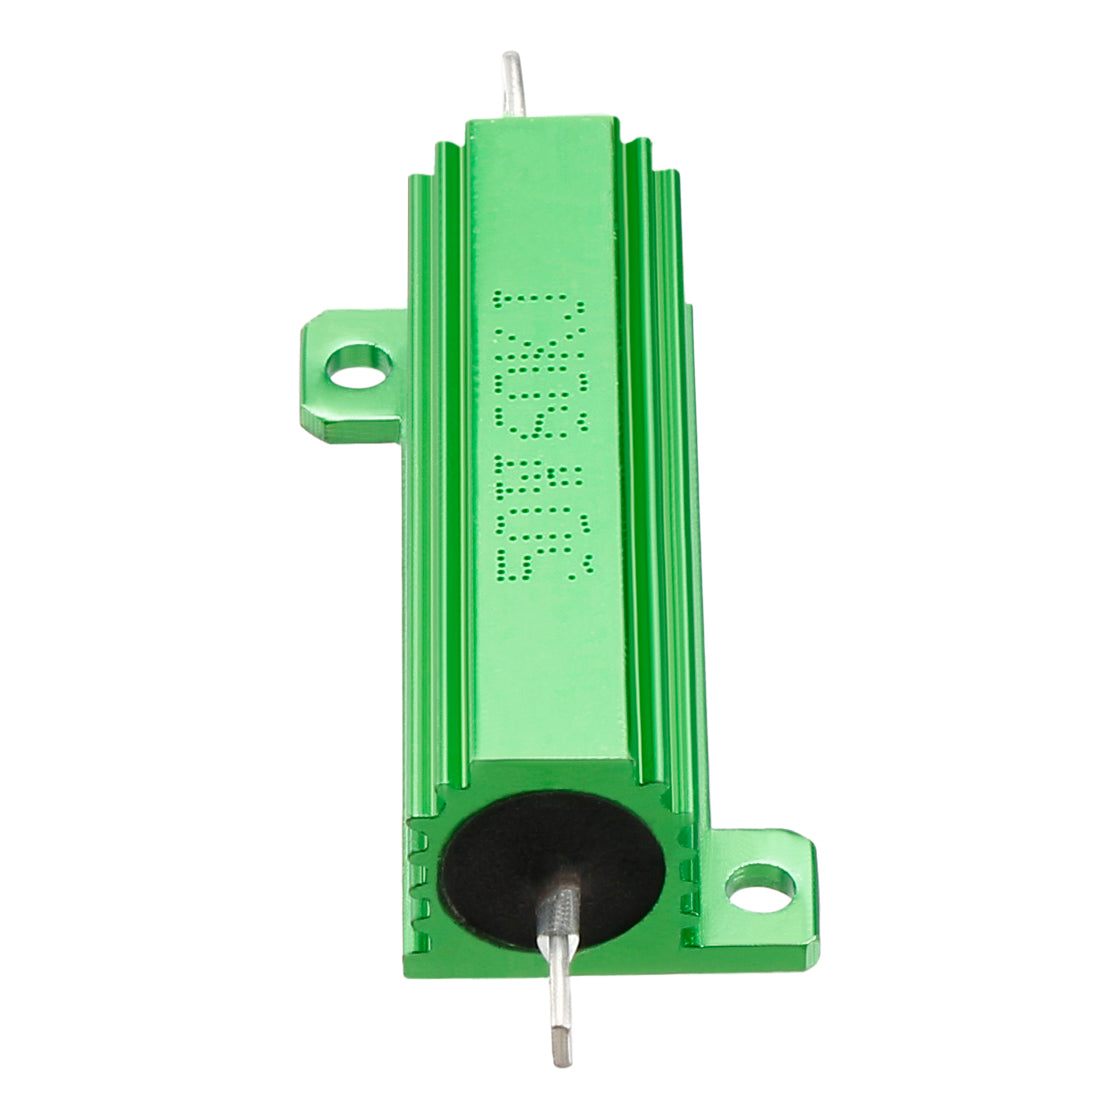 uxcell Uxcell 50W 60k Ohm 5% Aluminum Housing Resistor Screw  Chassis Mounted Aluminum Case Wirewound Resistor Load Resistors Green 2 pcs